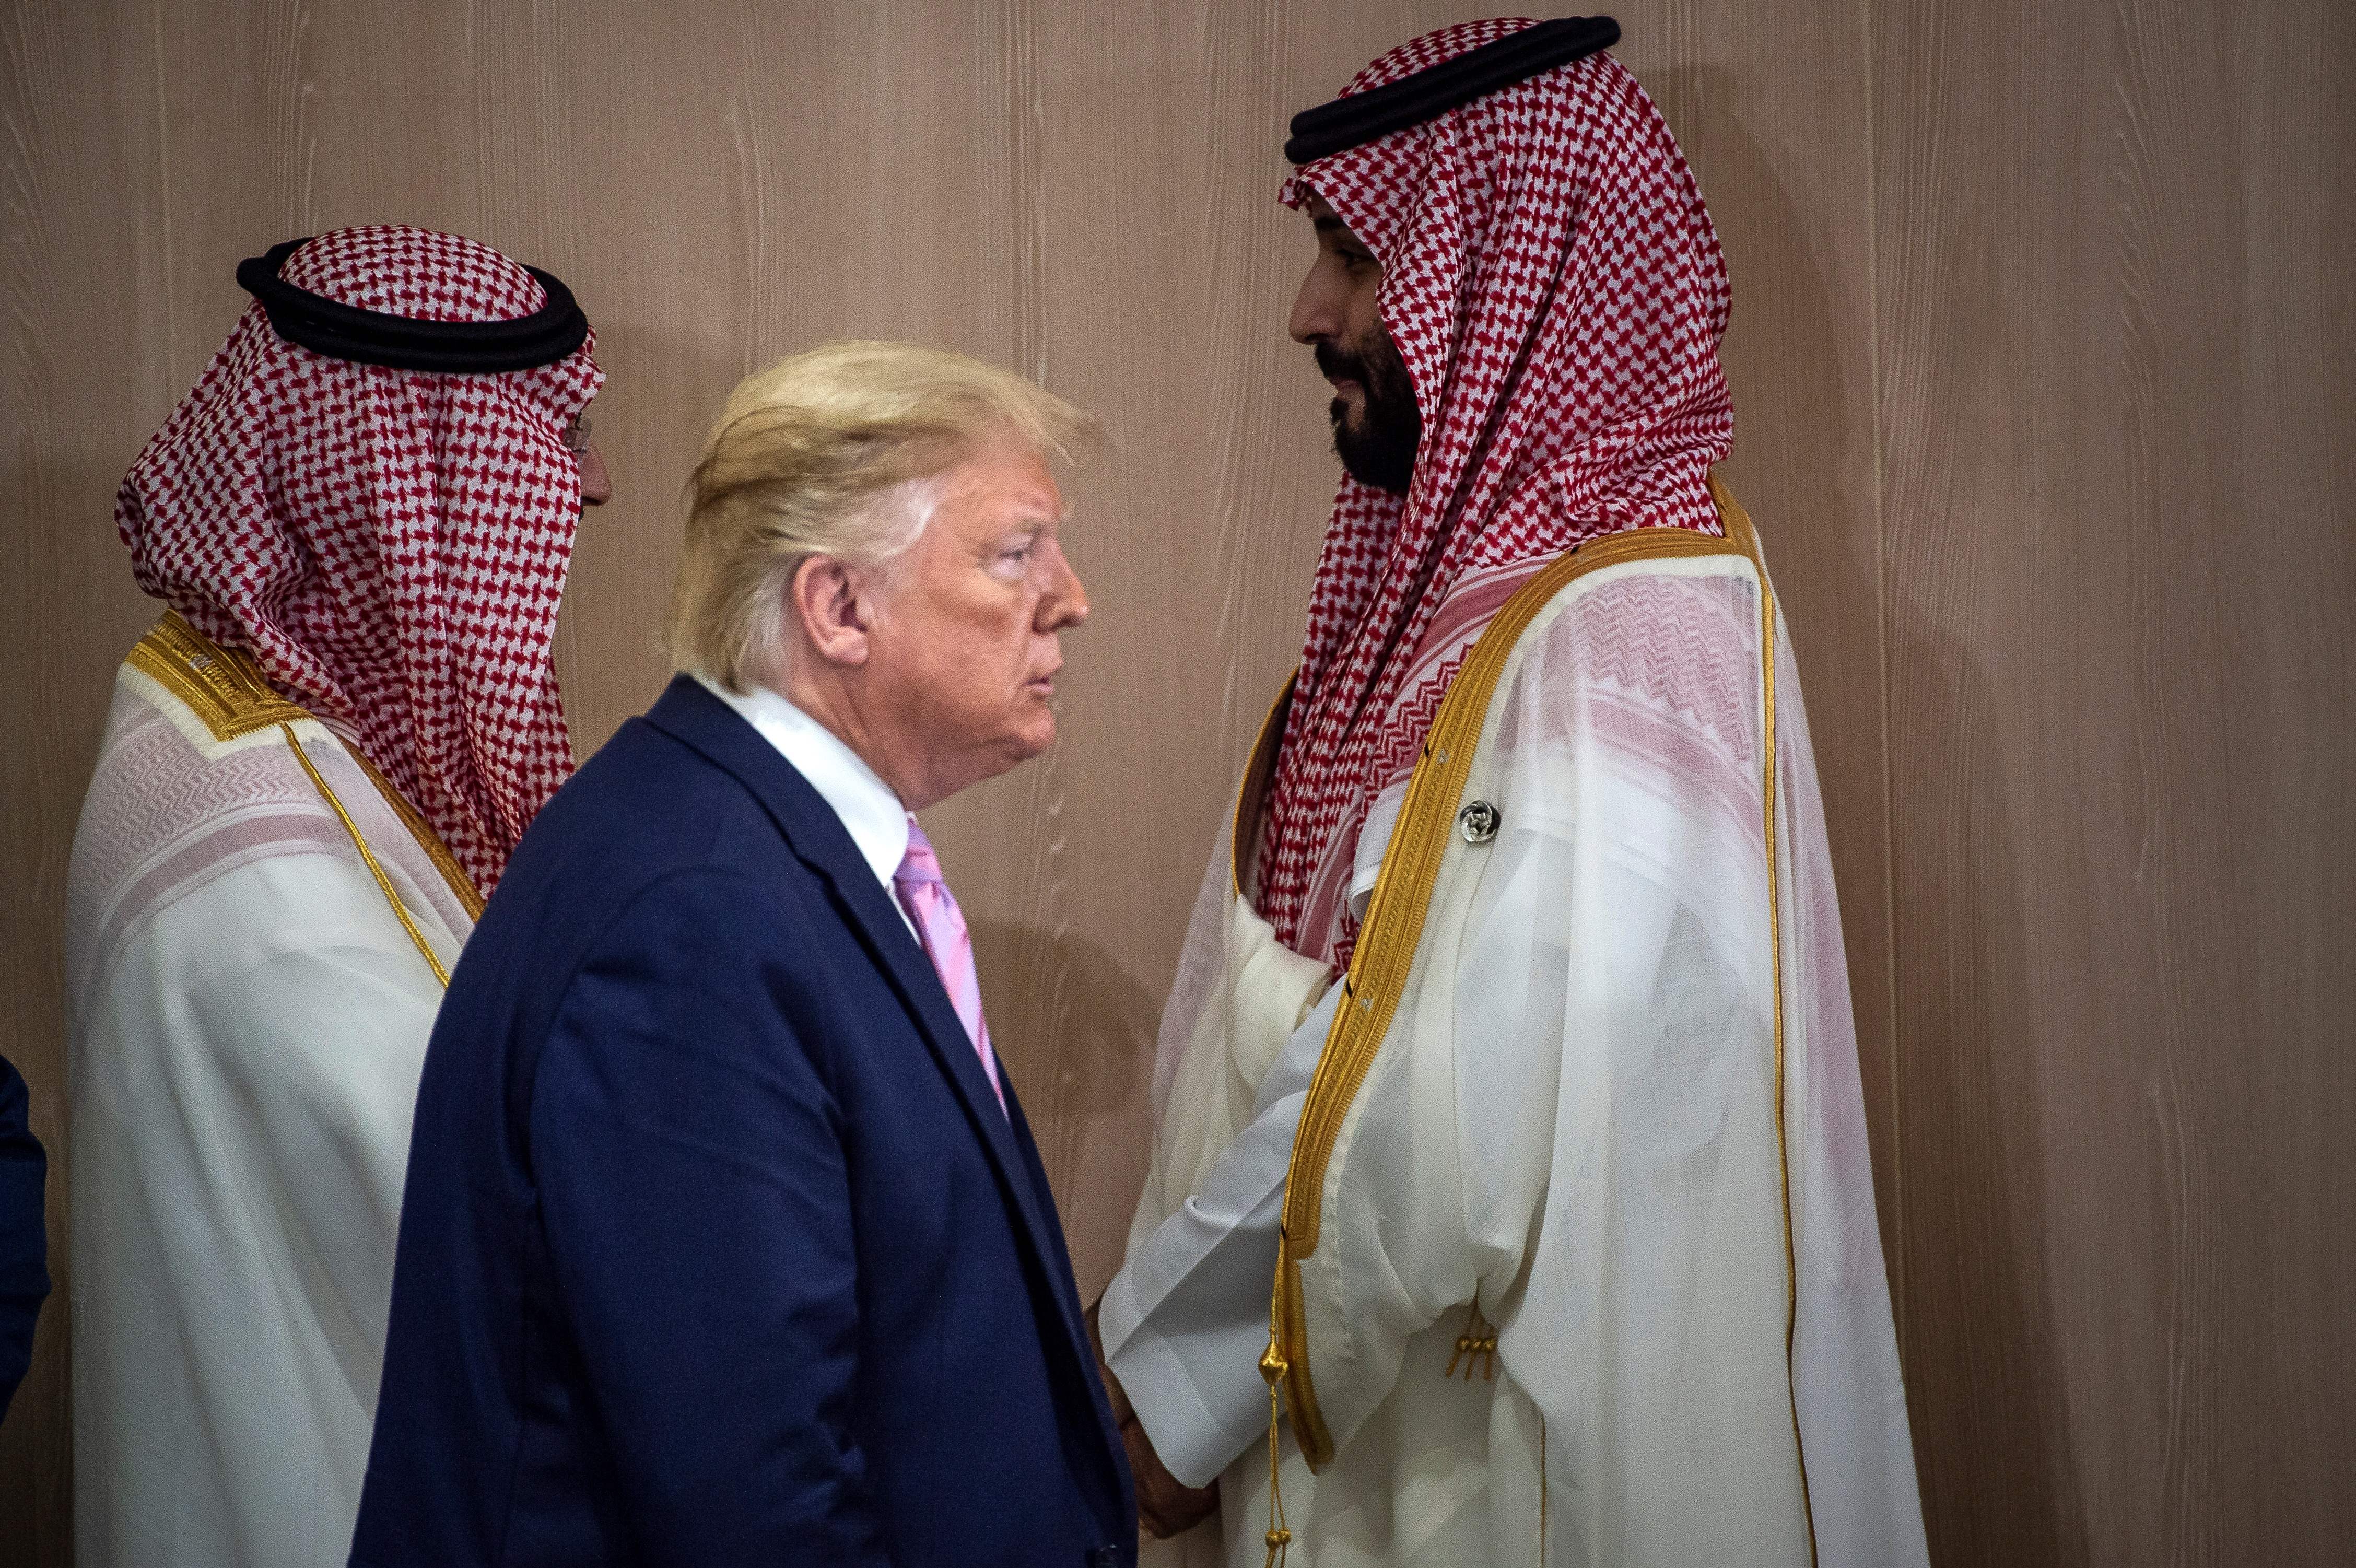 US President Trump and Saudi Arabia's Crown Prince Mohammed Bin Salman arrive for a meeting on "World Economy" at the G20 Summit in Osaka on June 28, 2019. (Eliot Blondet—AFP/Getty Images)